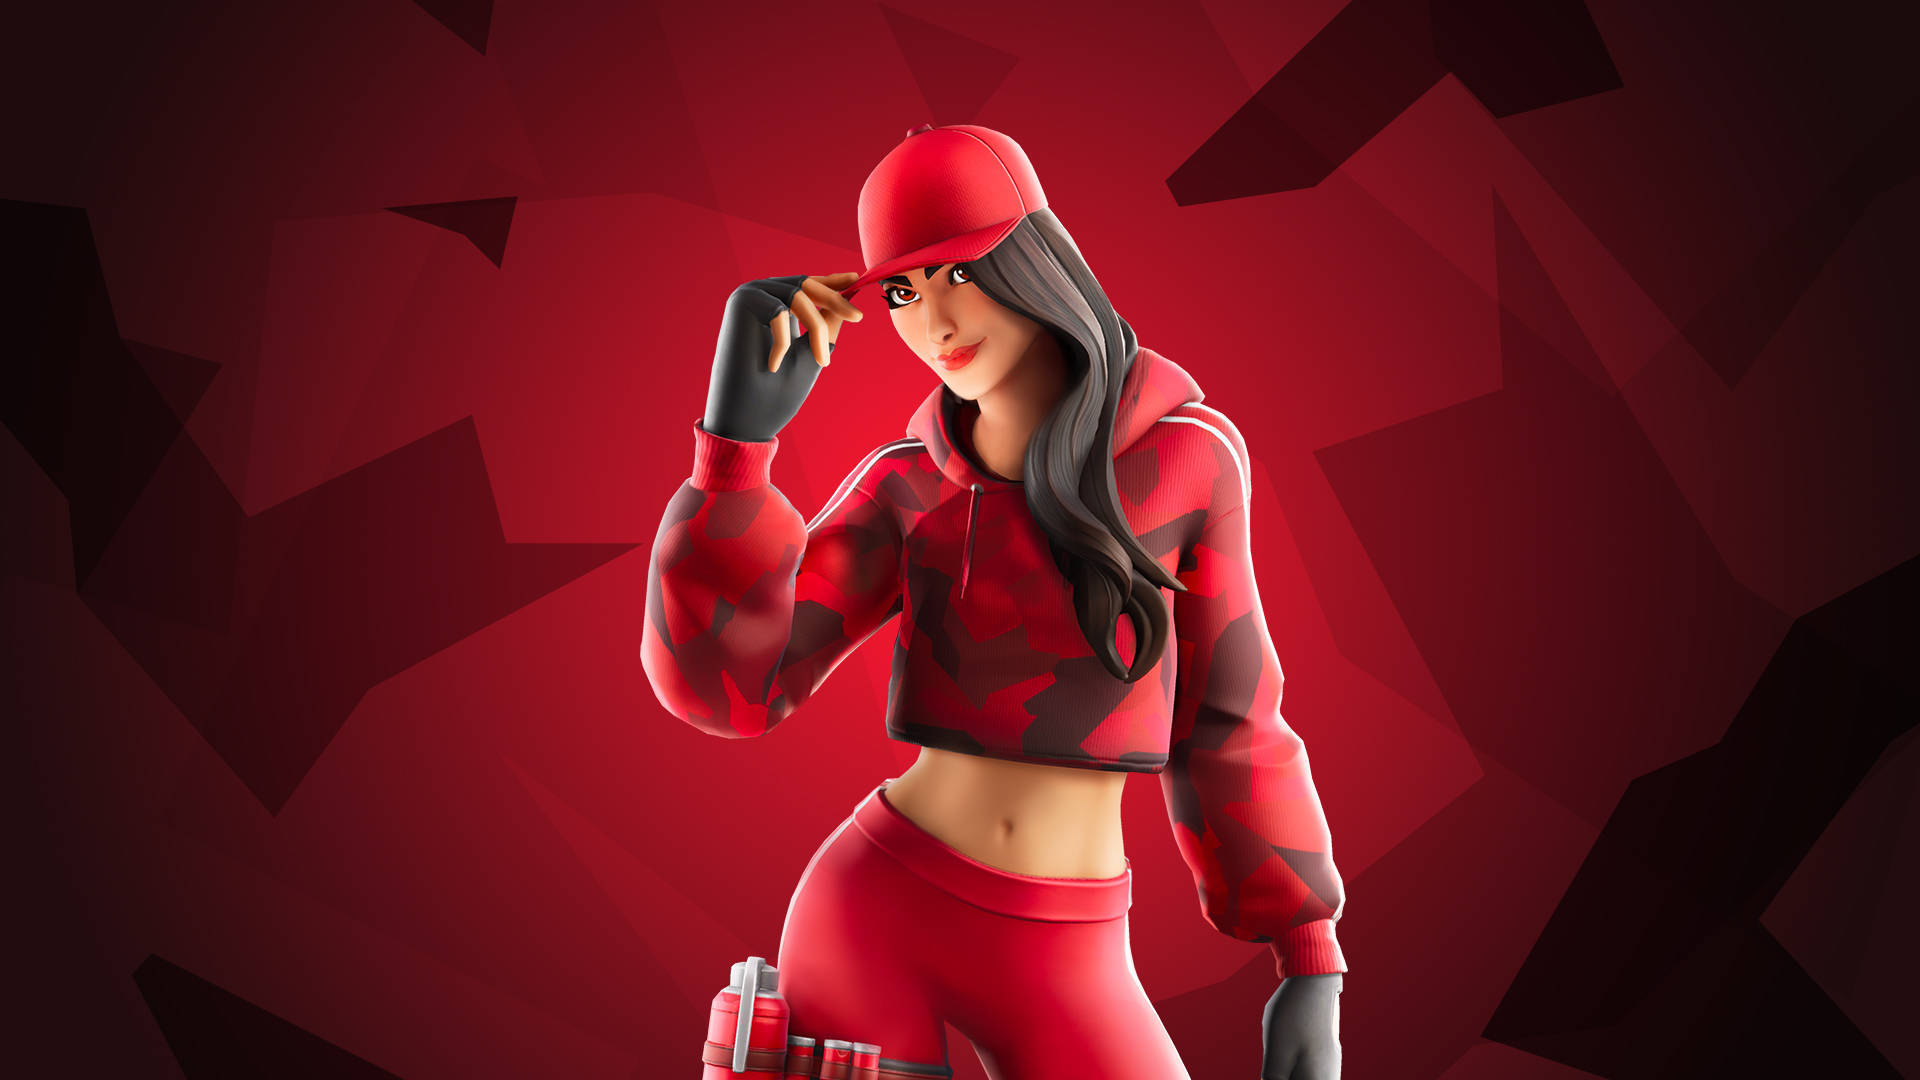 Show Up and Slay with this Fabulous Fortnite Girl Wallpaper